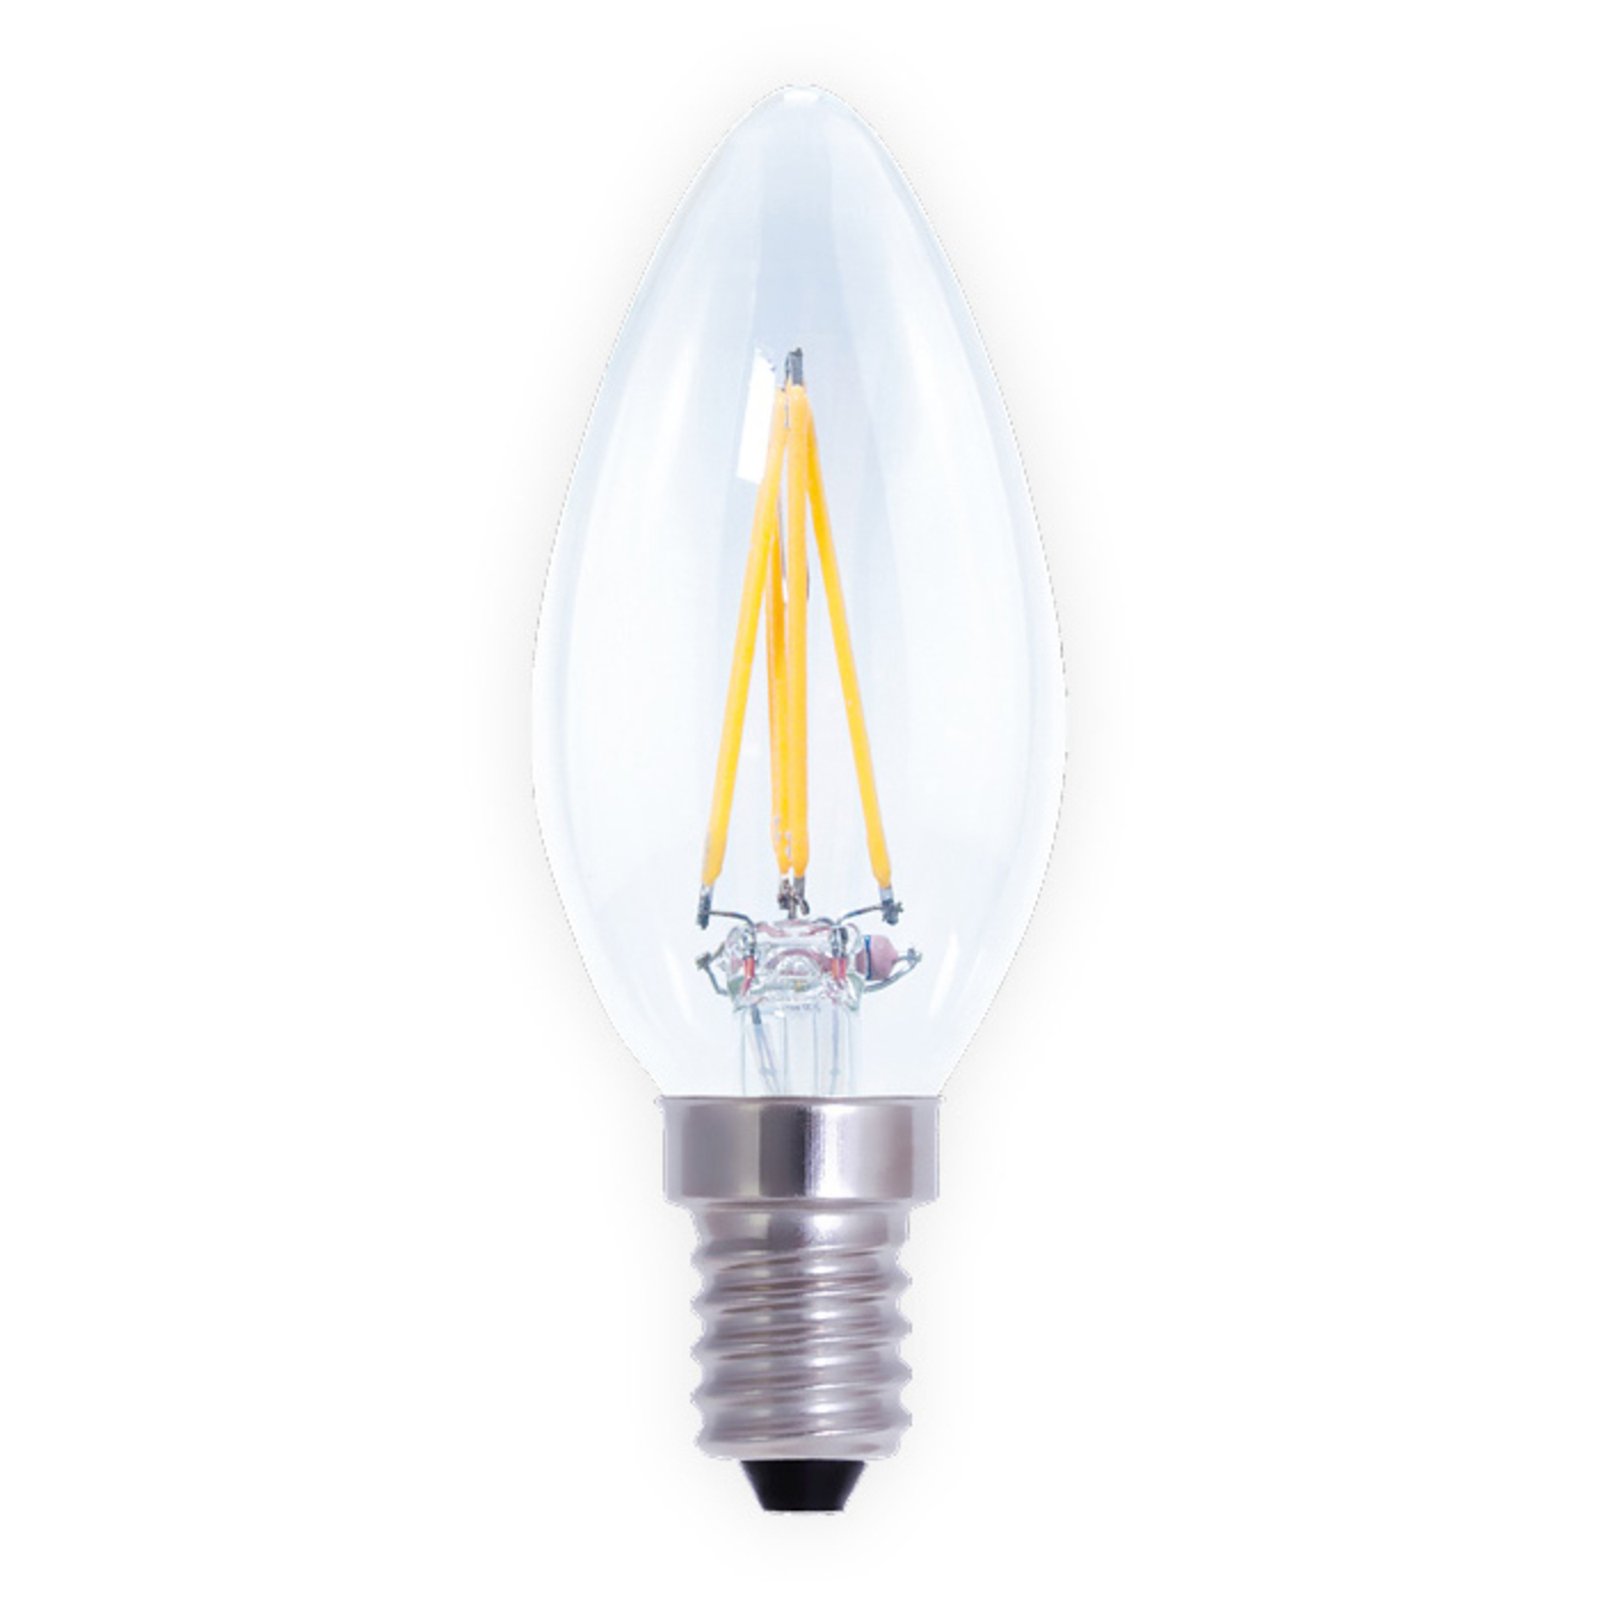 Segula E14 4 W ampoule bougie LED Ambient dimmable